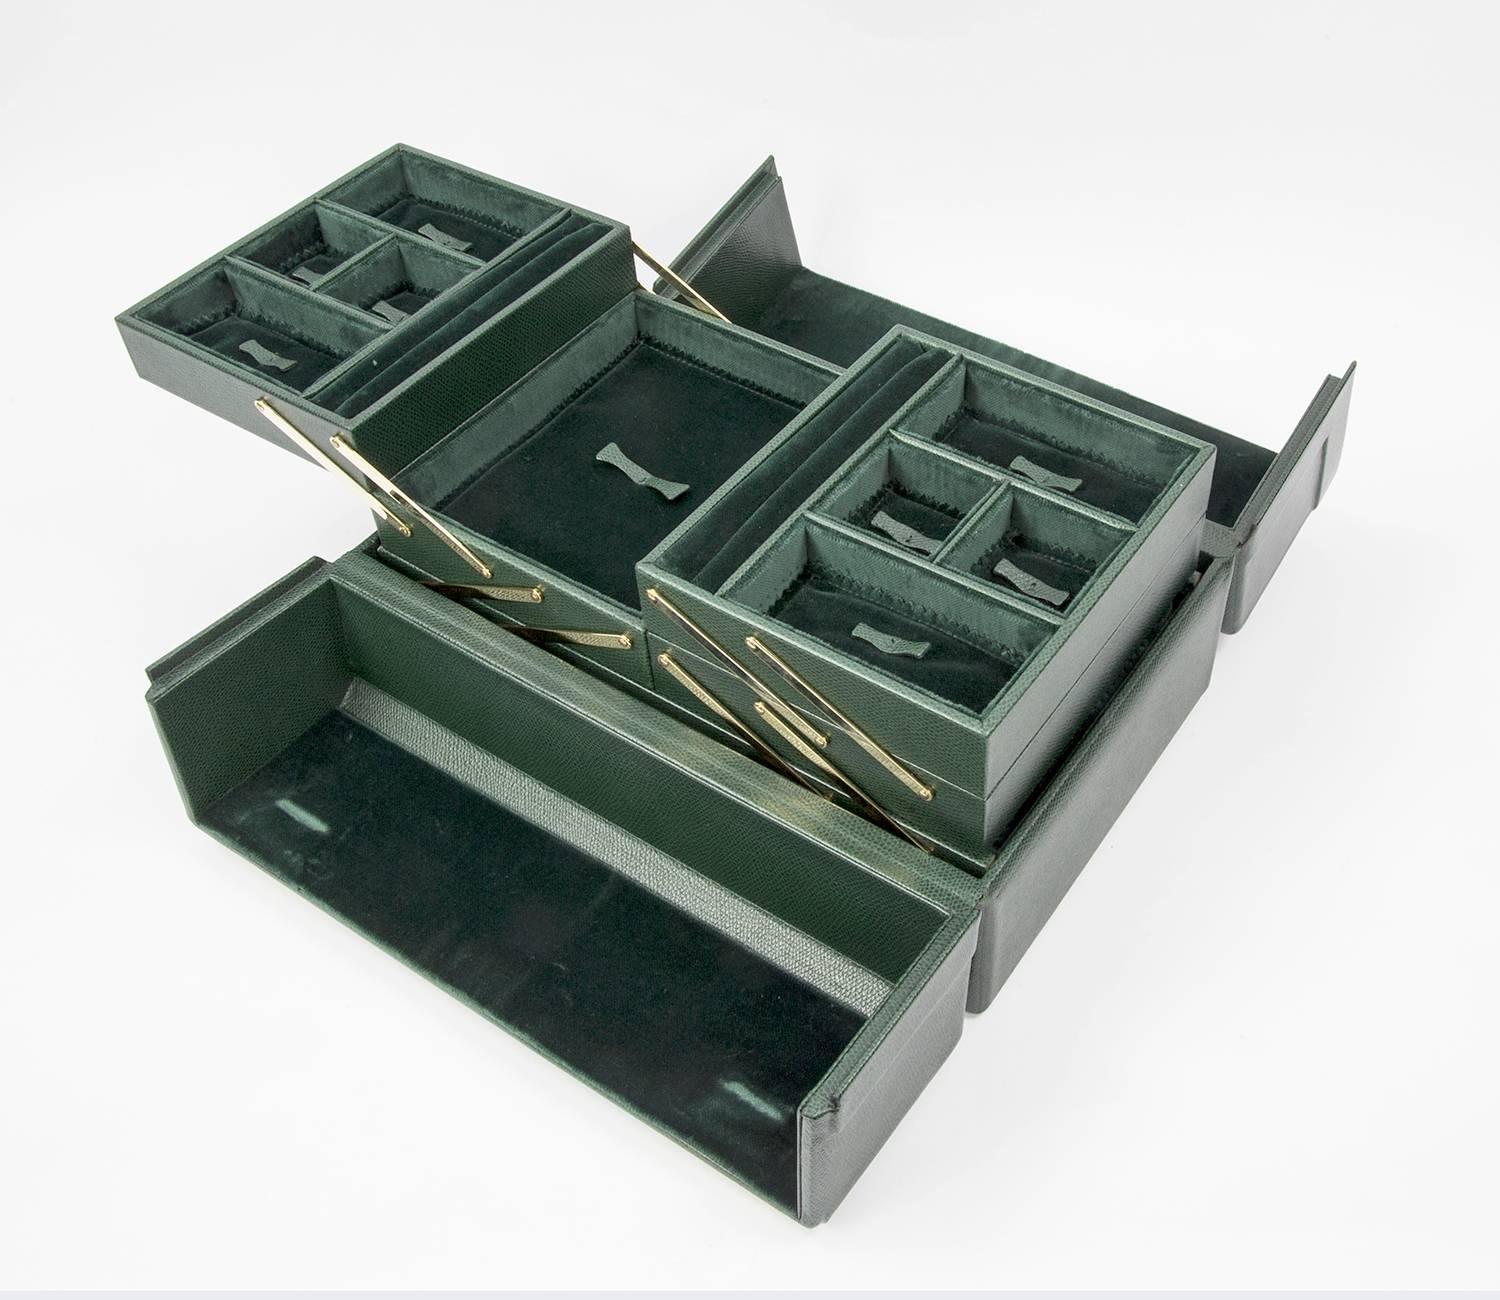 Curating Luxury with a magnificent Tanner Krolle large green leather jewelry case, fully lined in green velvet, comes with Tanner Krolle large green protection bag, Tanner Krolle: A tradition of craftsmanship in leather since 1856. Generally,